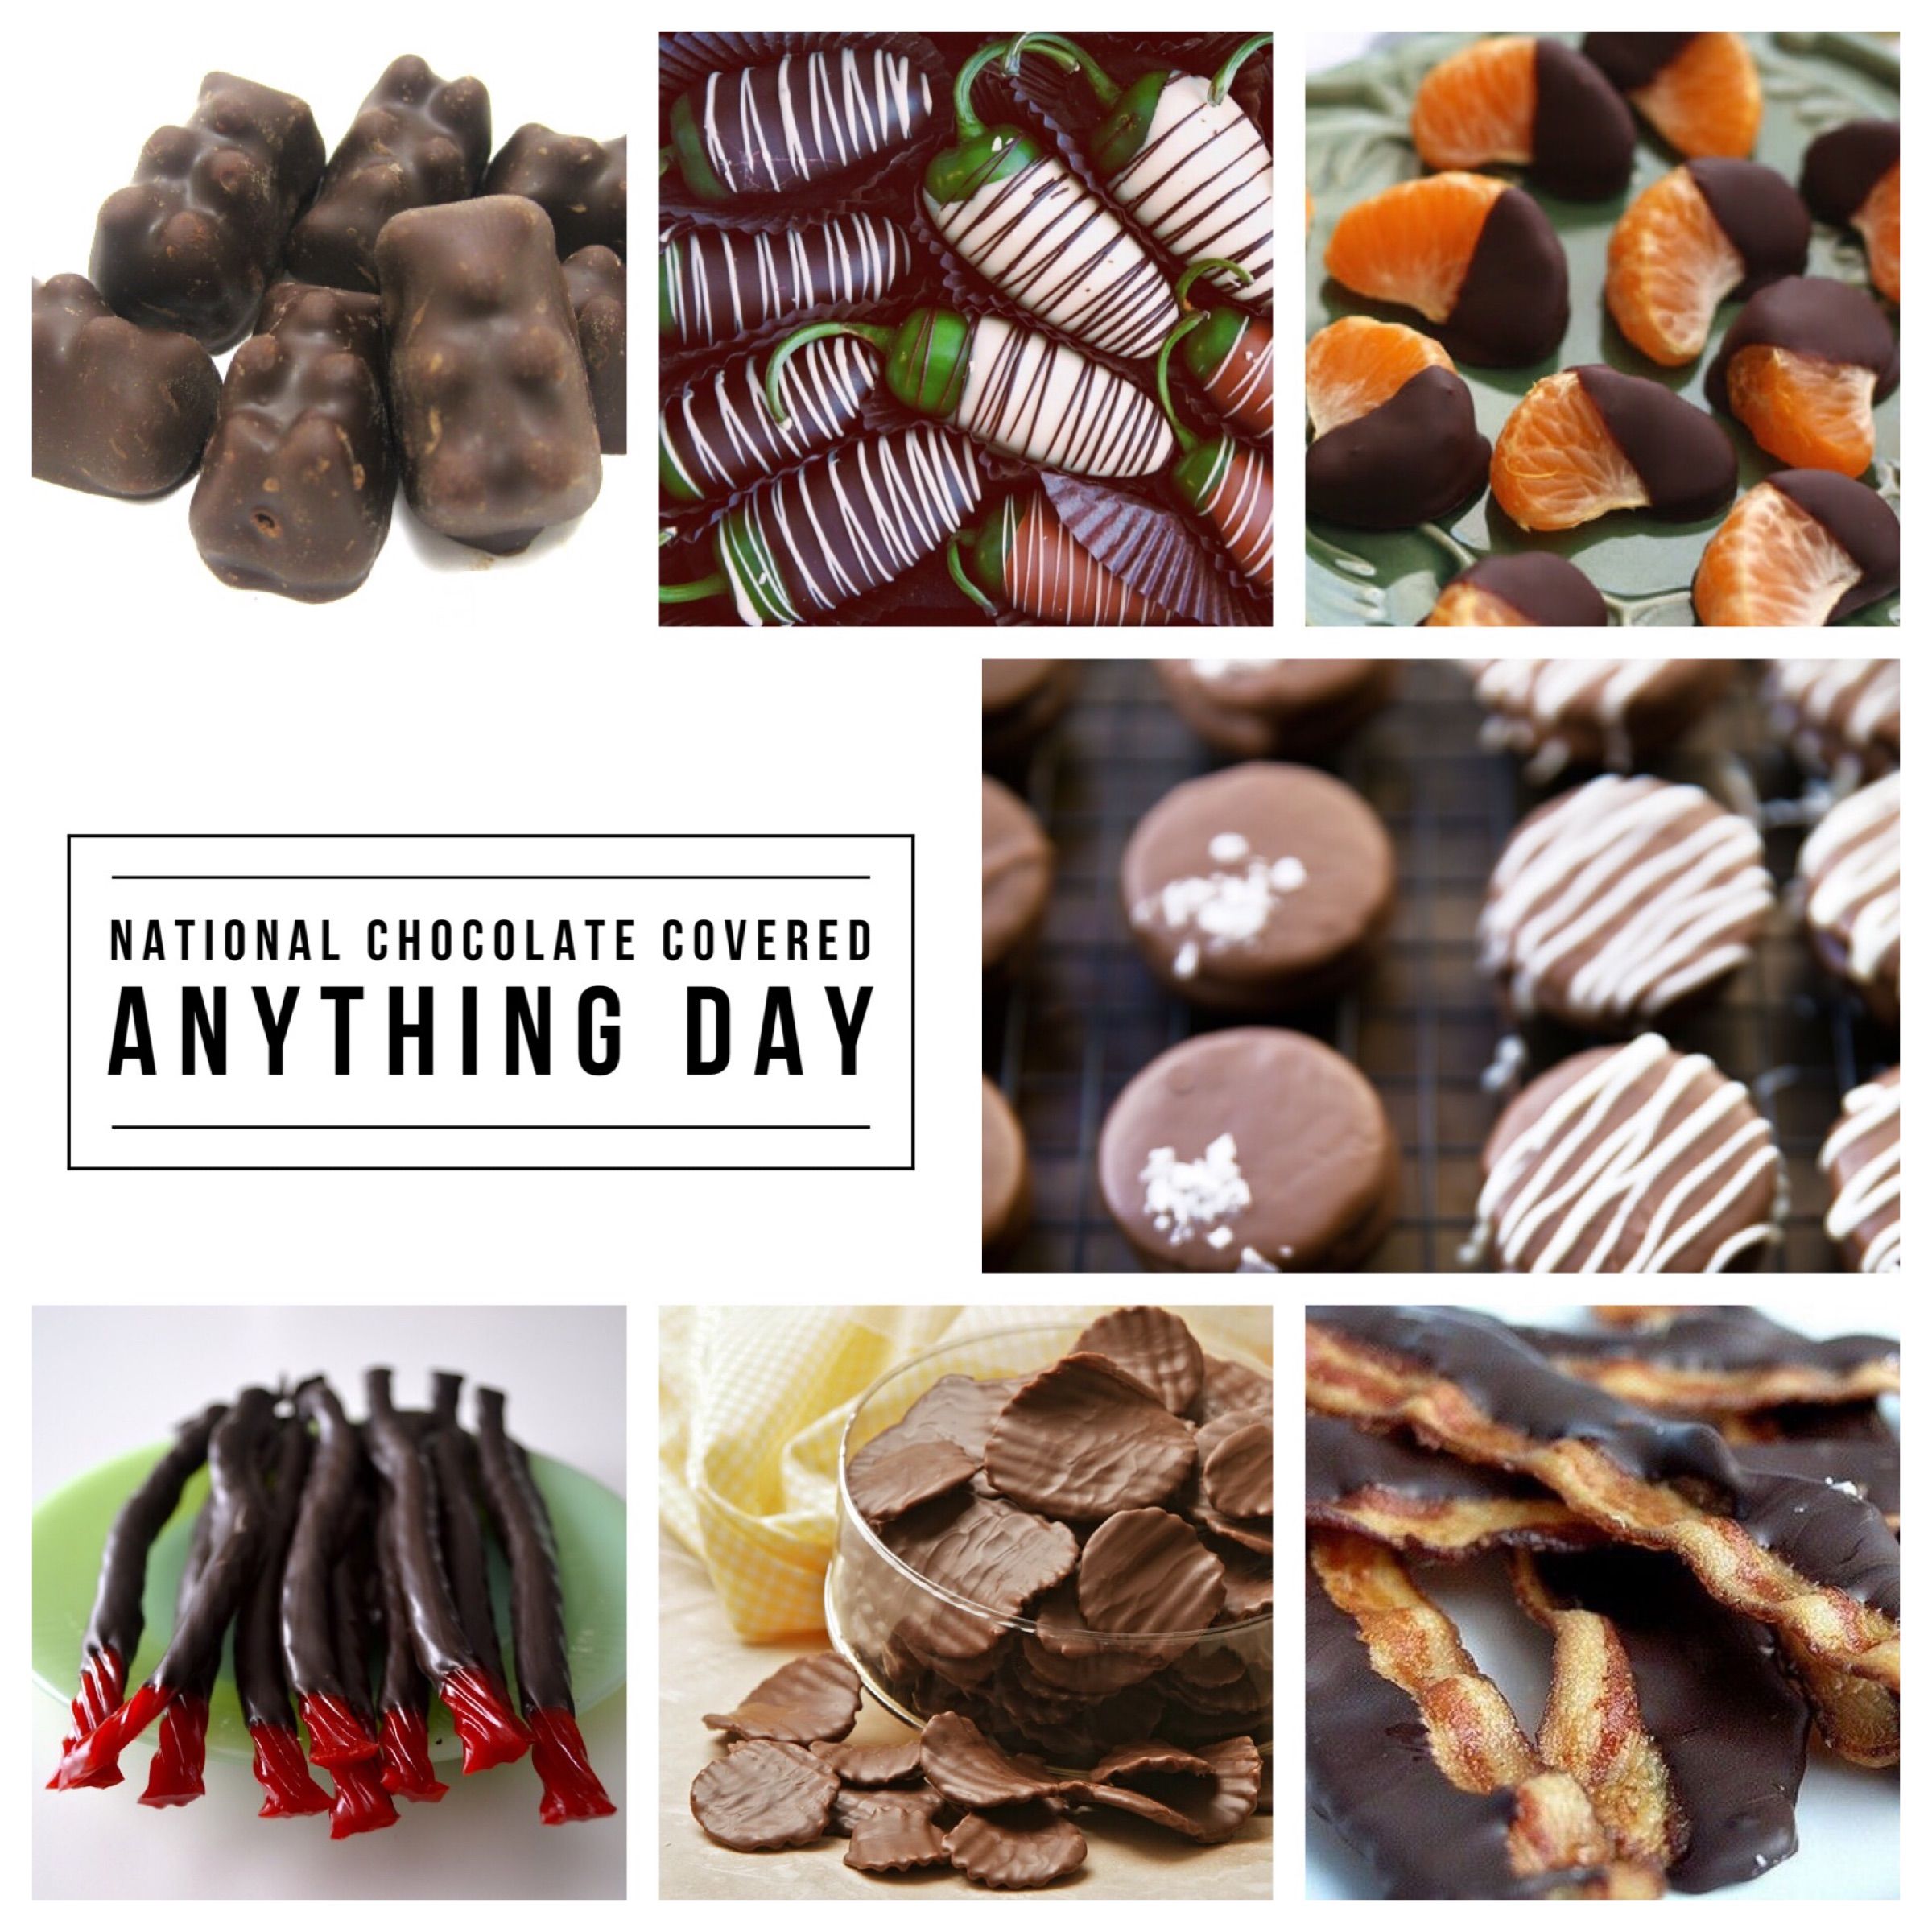 National Chocolate Covered Anything Day - Special Holidays Boost Sales Print On Demand